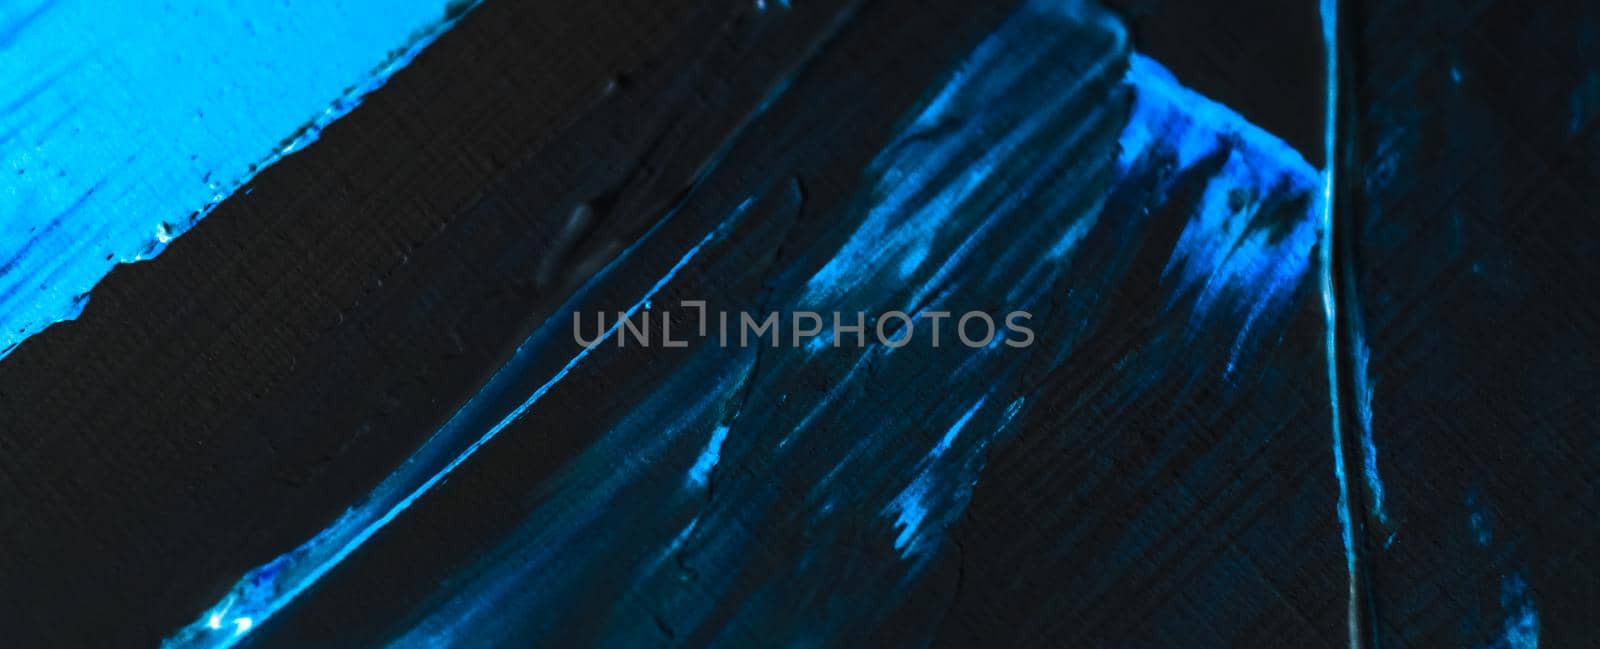 Artistic abstract texture background, blue acrylic paint brush stroke, textured ink oil splash as print backdrop for luxury holiday brand, flatlay banner design by Anneleven